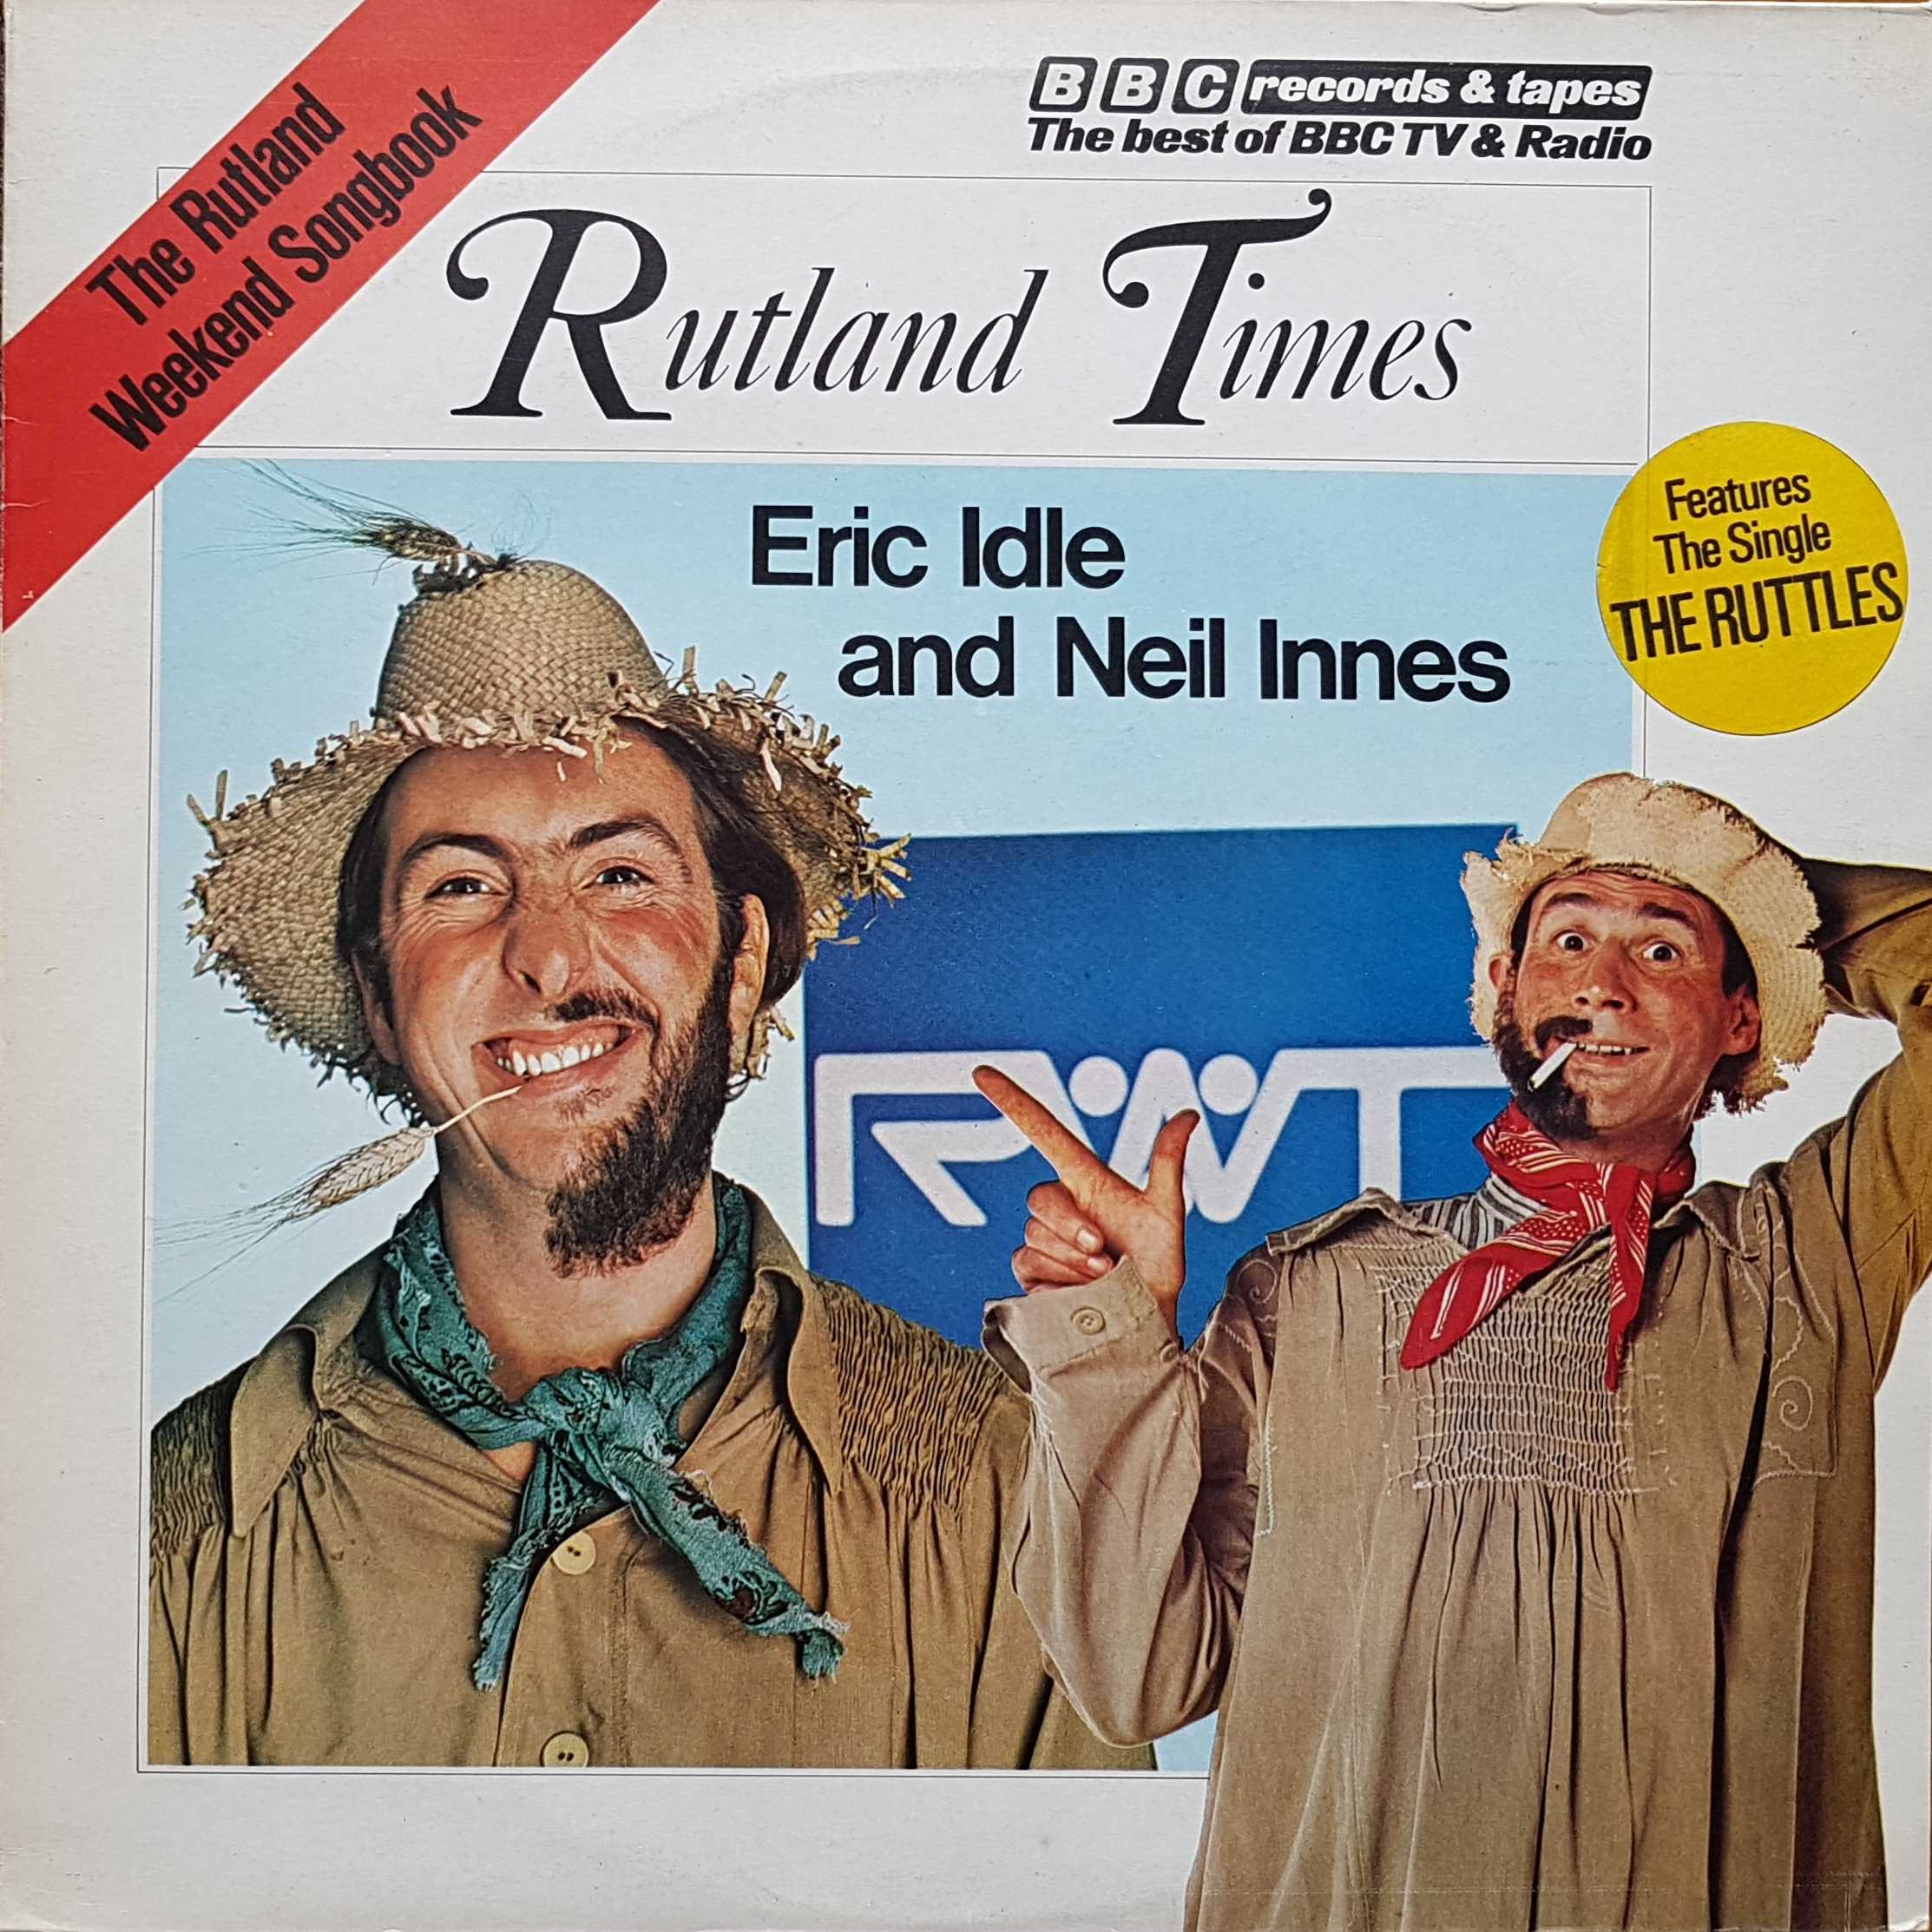 Picture of REB 233 Rutland weekend songbook by artist Eric Idle / Neil Innes from the BBC albums - Records and Tapes library